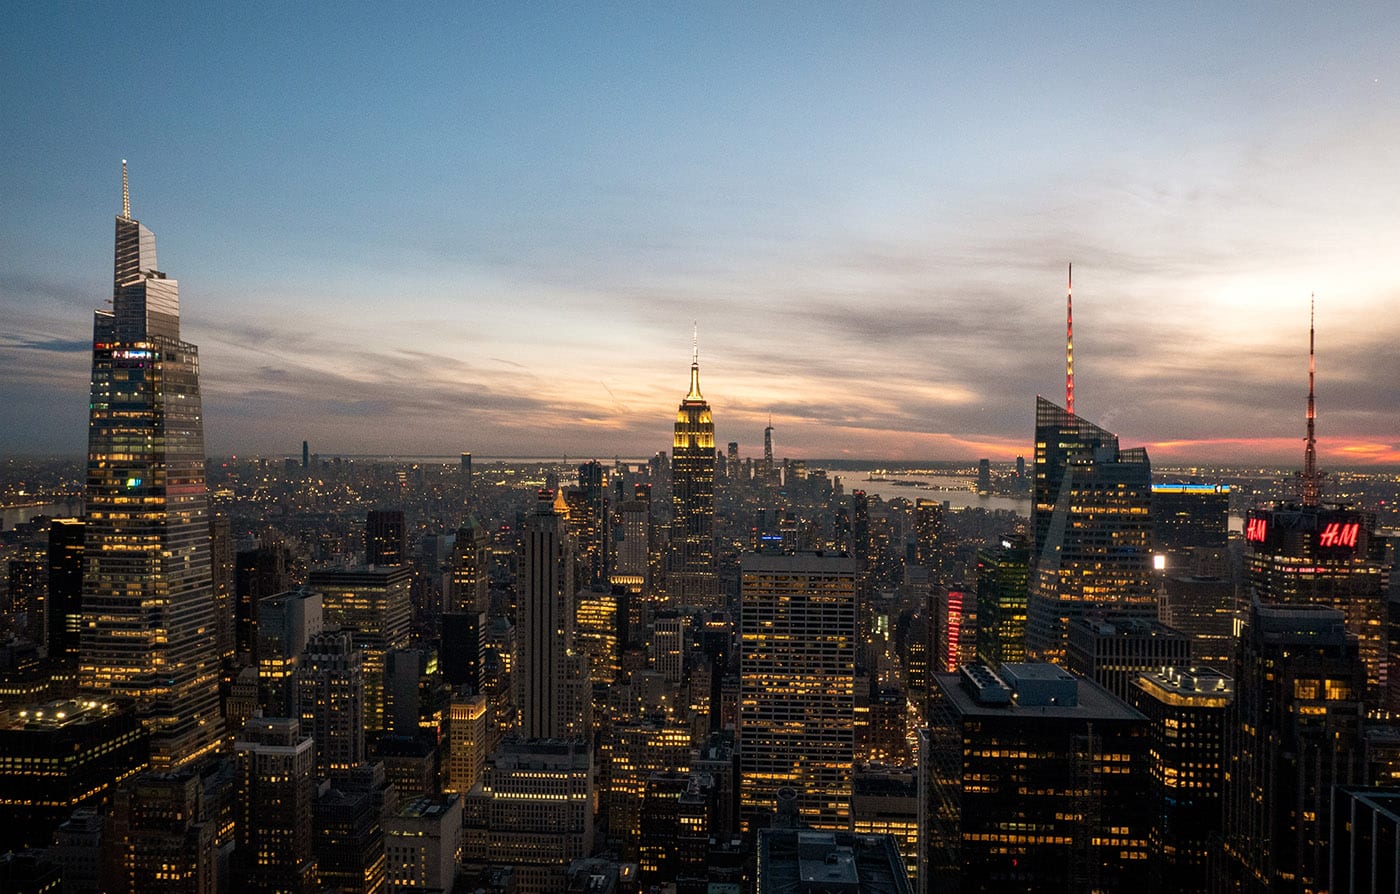 The 10 most beautiful photo spots in New York 13